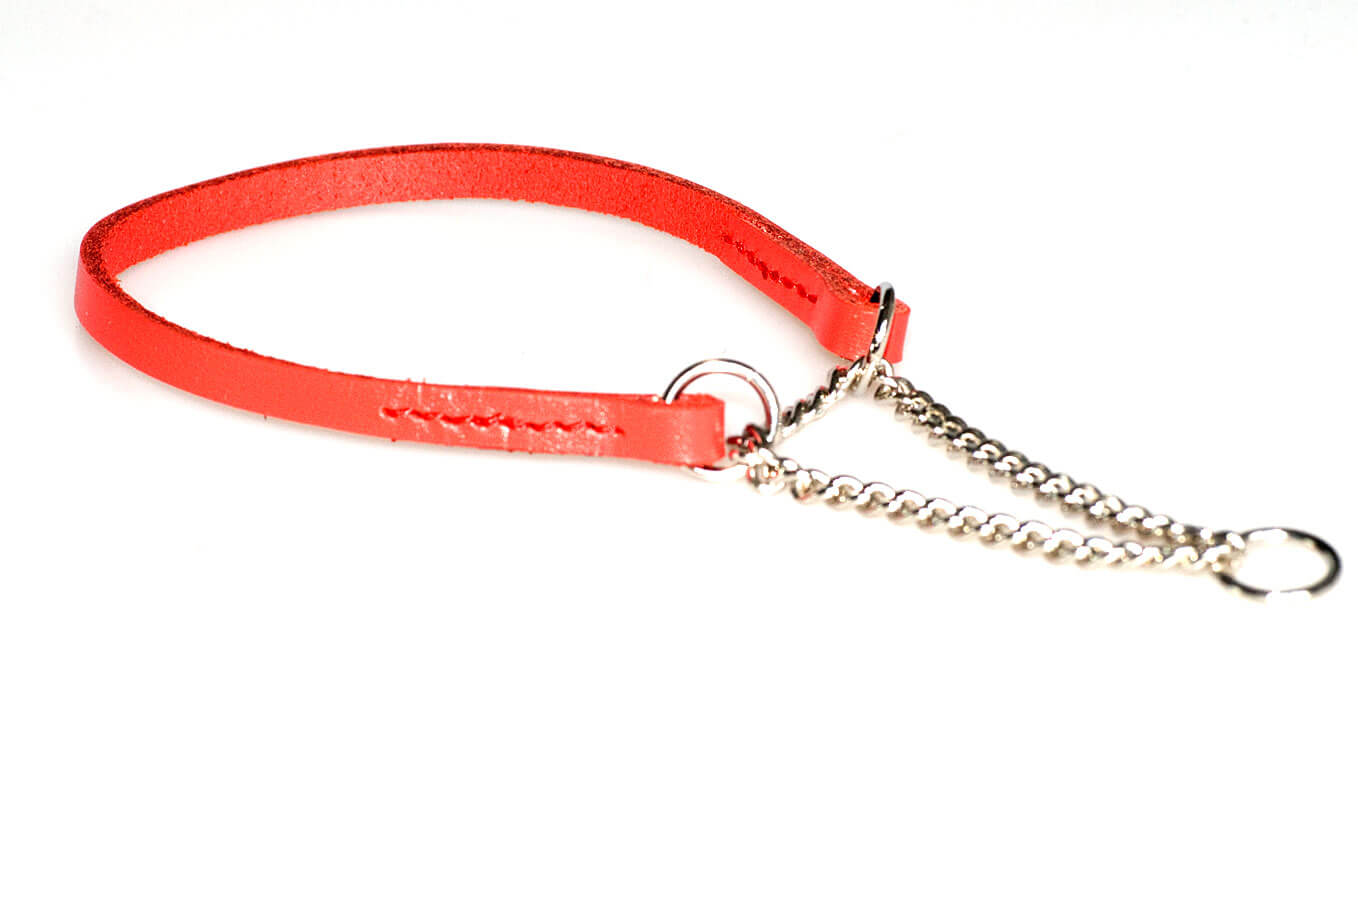 Red leather martingale dog show collar